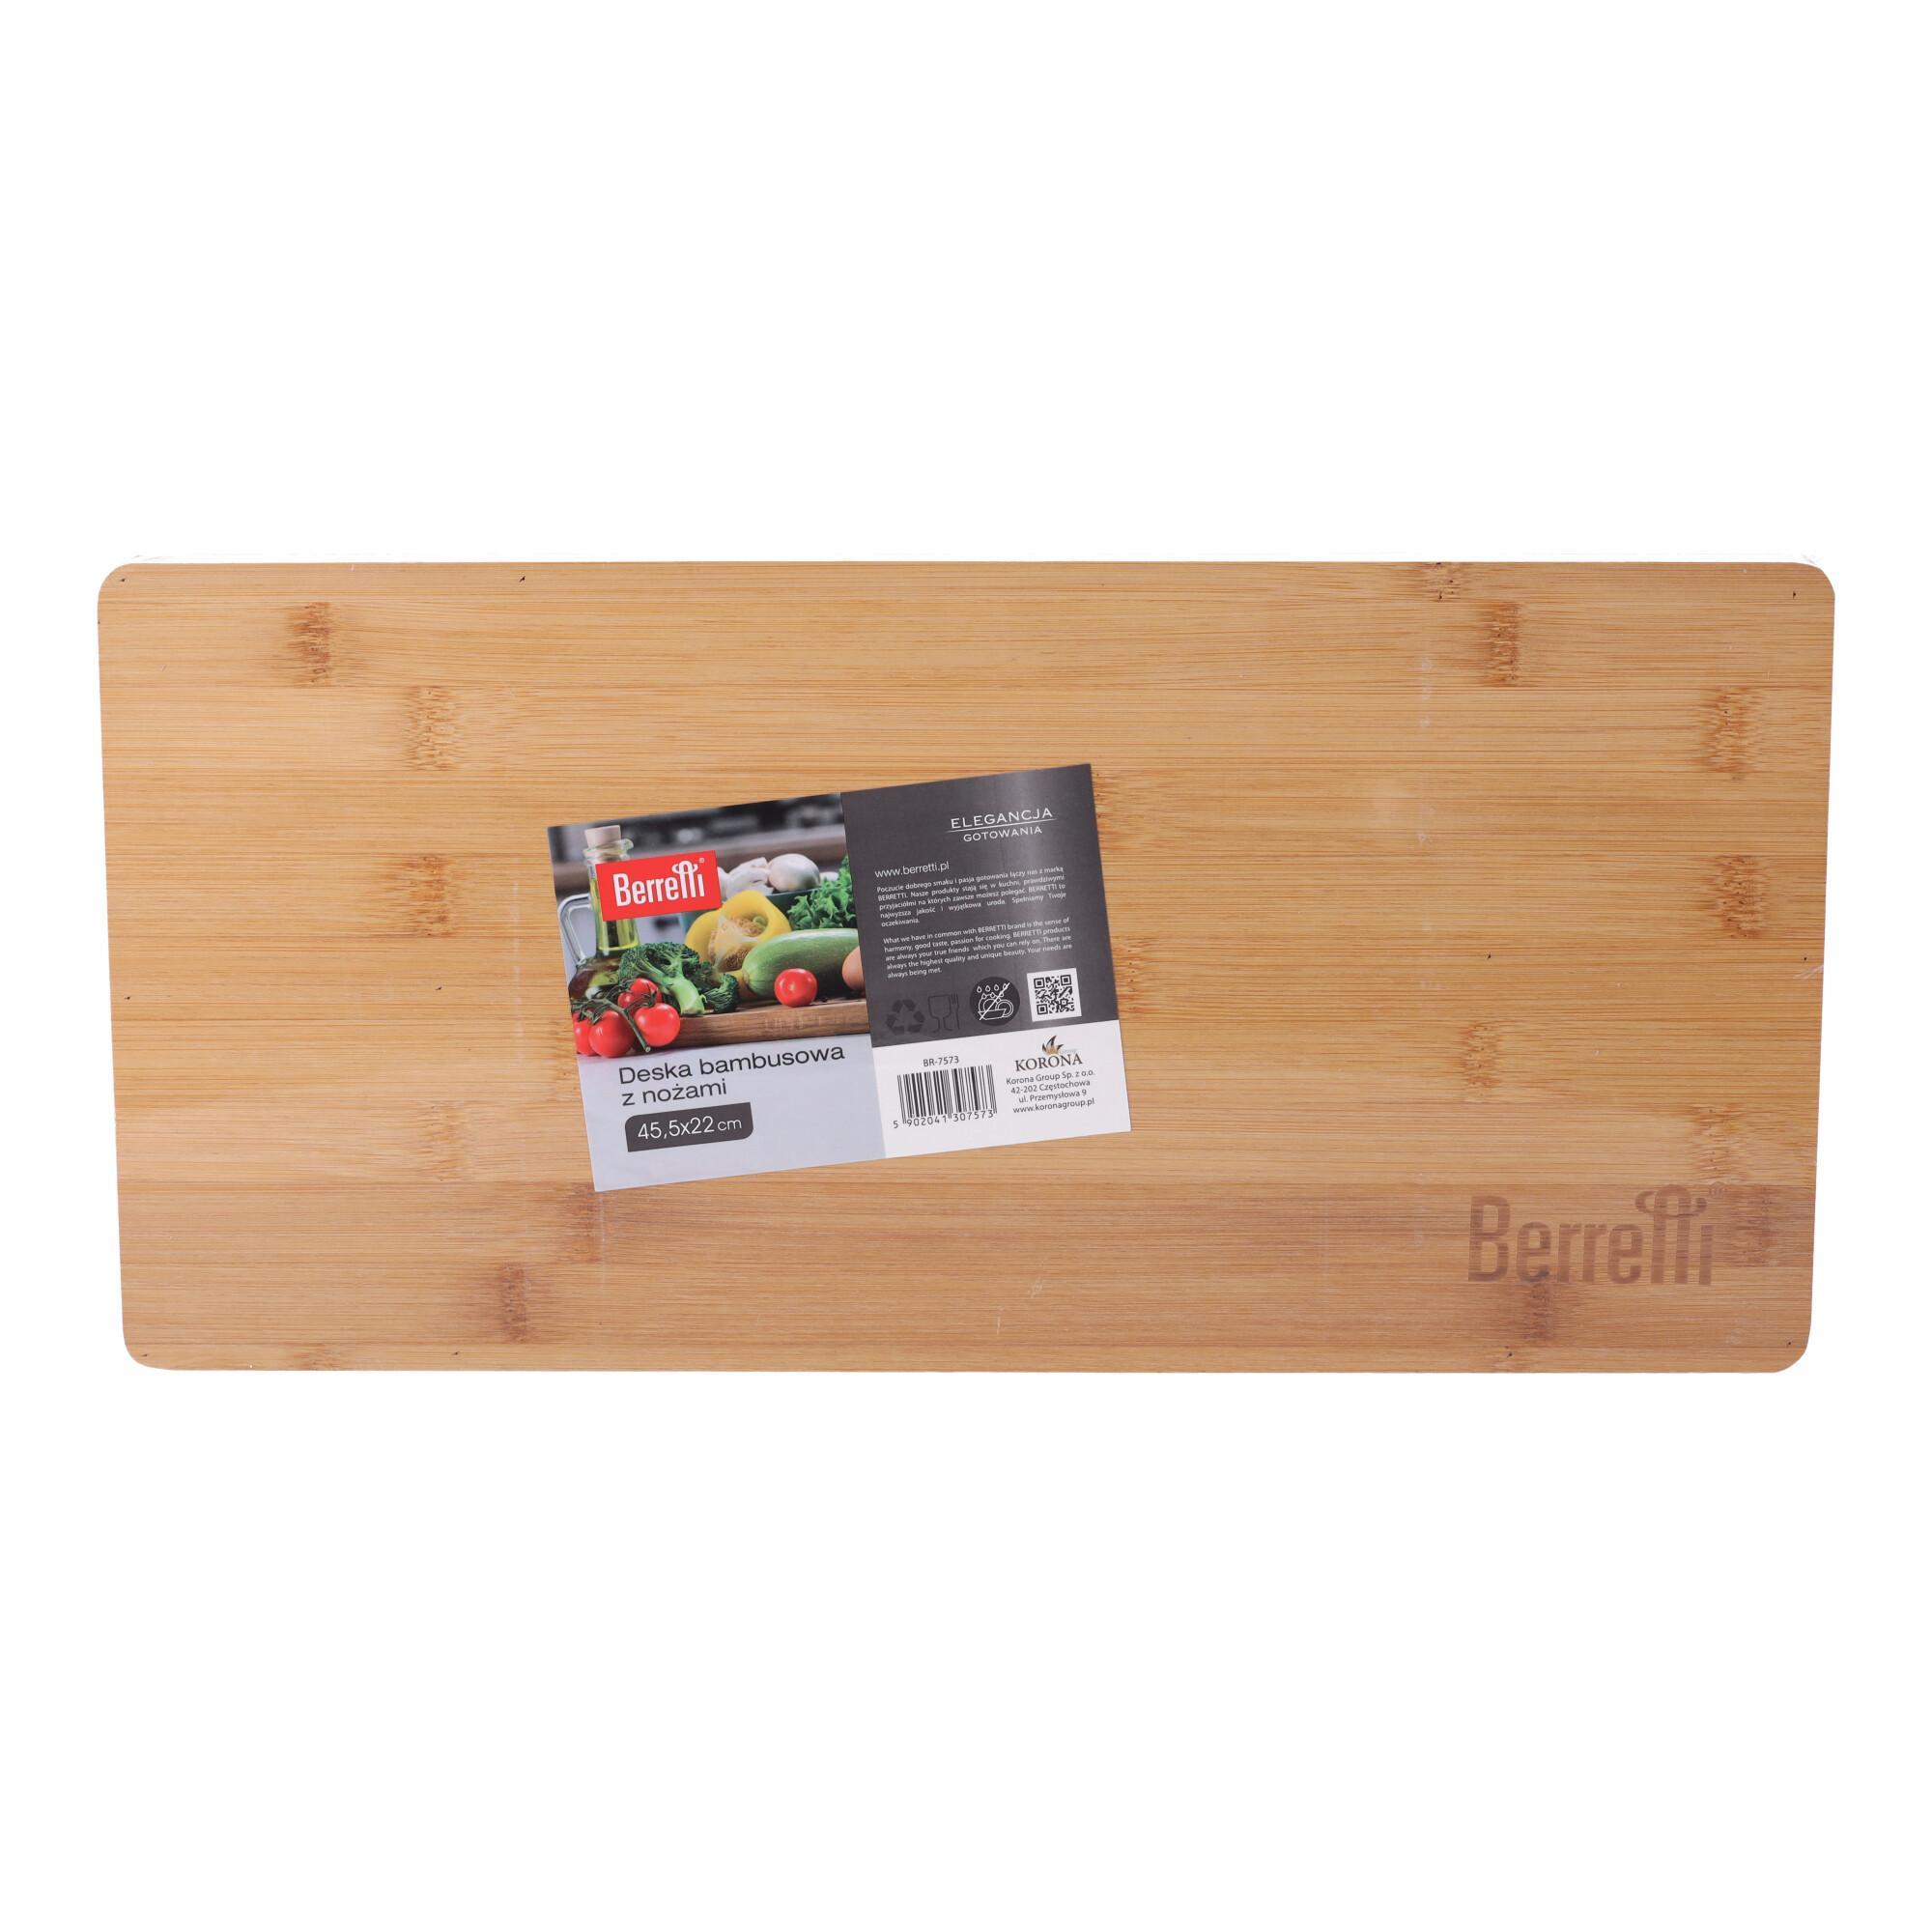 Bamboo cheese serving board with knives BERRETTI, size 45.5x22x4 cm.